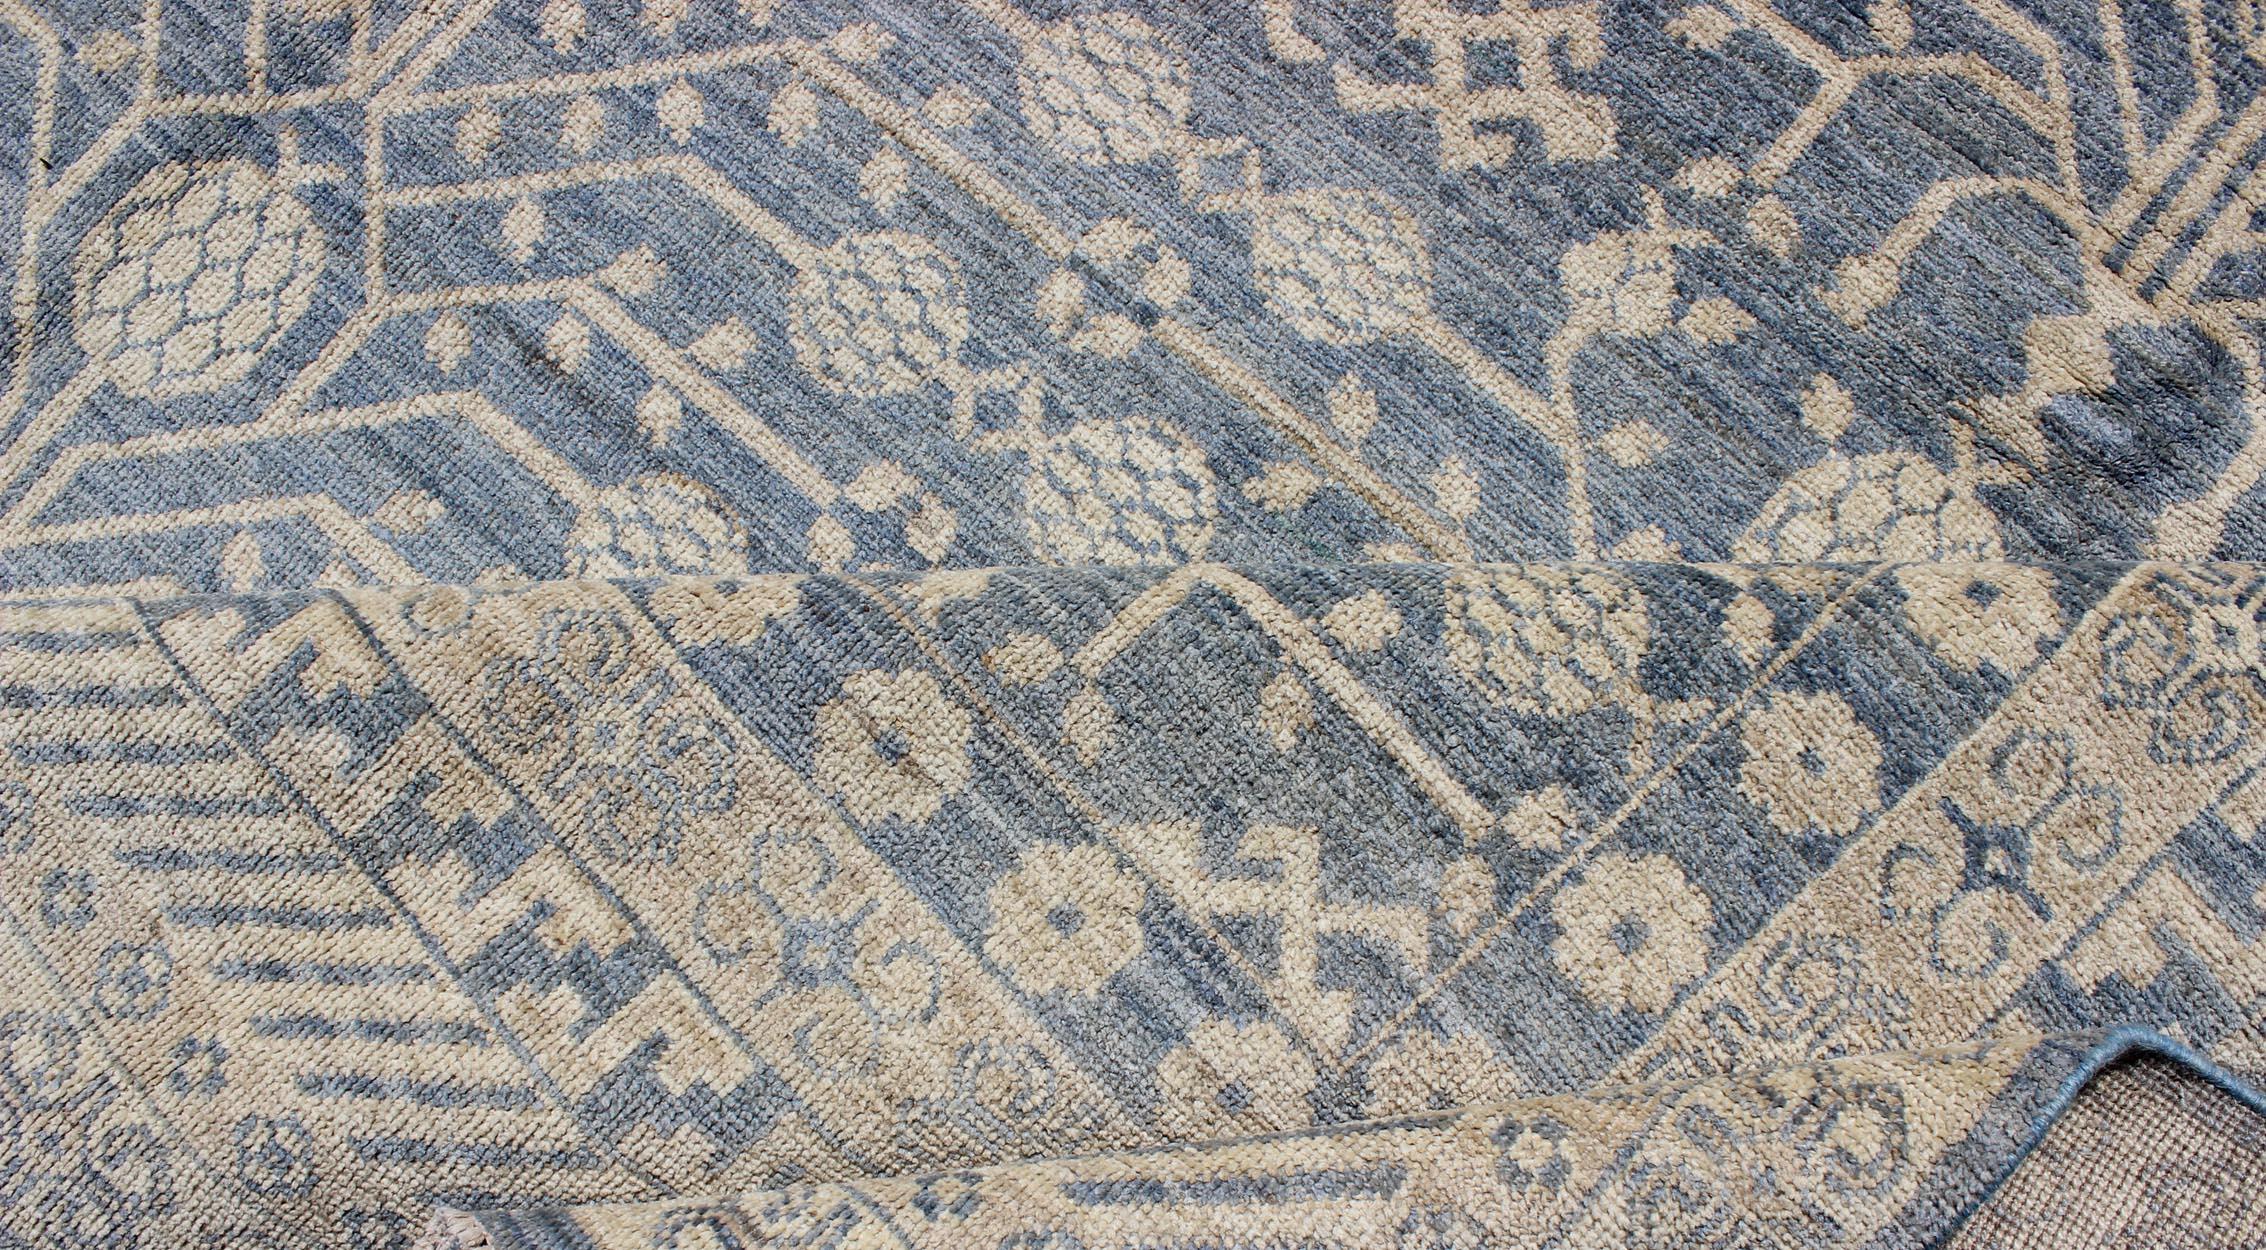 Khotan Design Rug with All-Over Pomegranate Pattern in Blue, Tan & Taupe For Sale 2